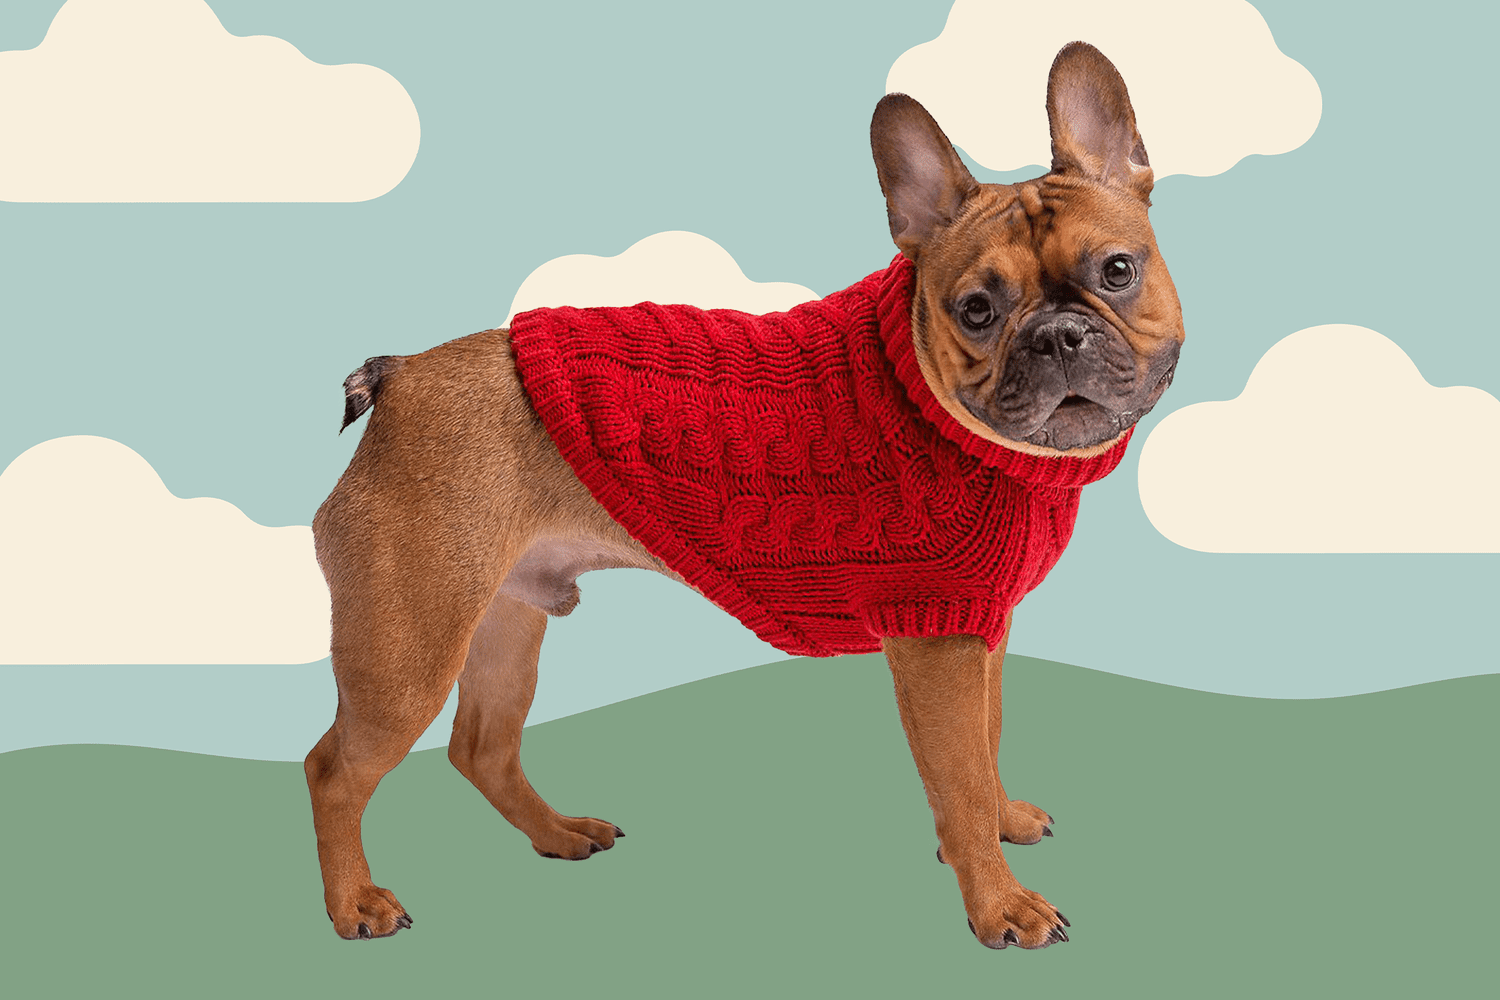 Dog Cat Cold Winter Sweater with Buttons Warm Dog Clothes for Small to Large Dogs Cats Pullover Dog Fleece Fabric Vest BIGNADO Dog Warm Jumper for Indoor and Outdoor Use